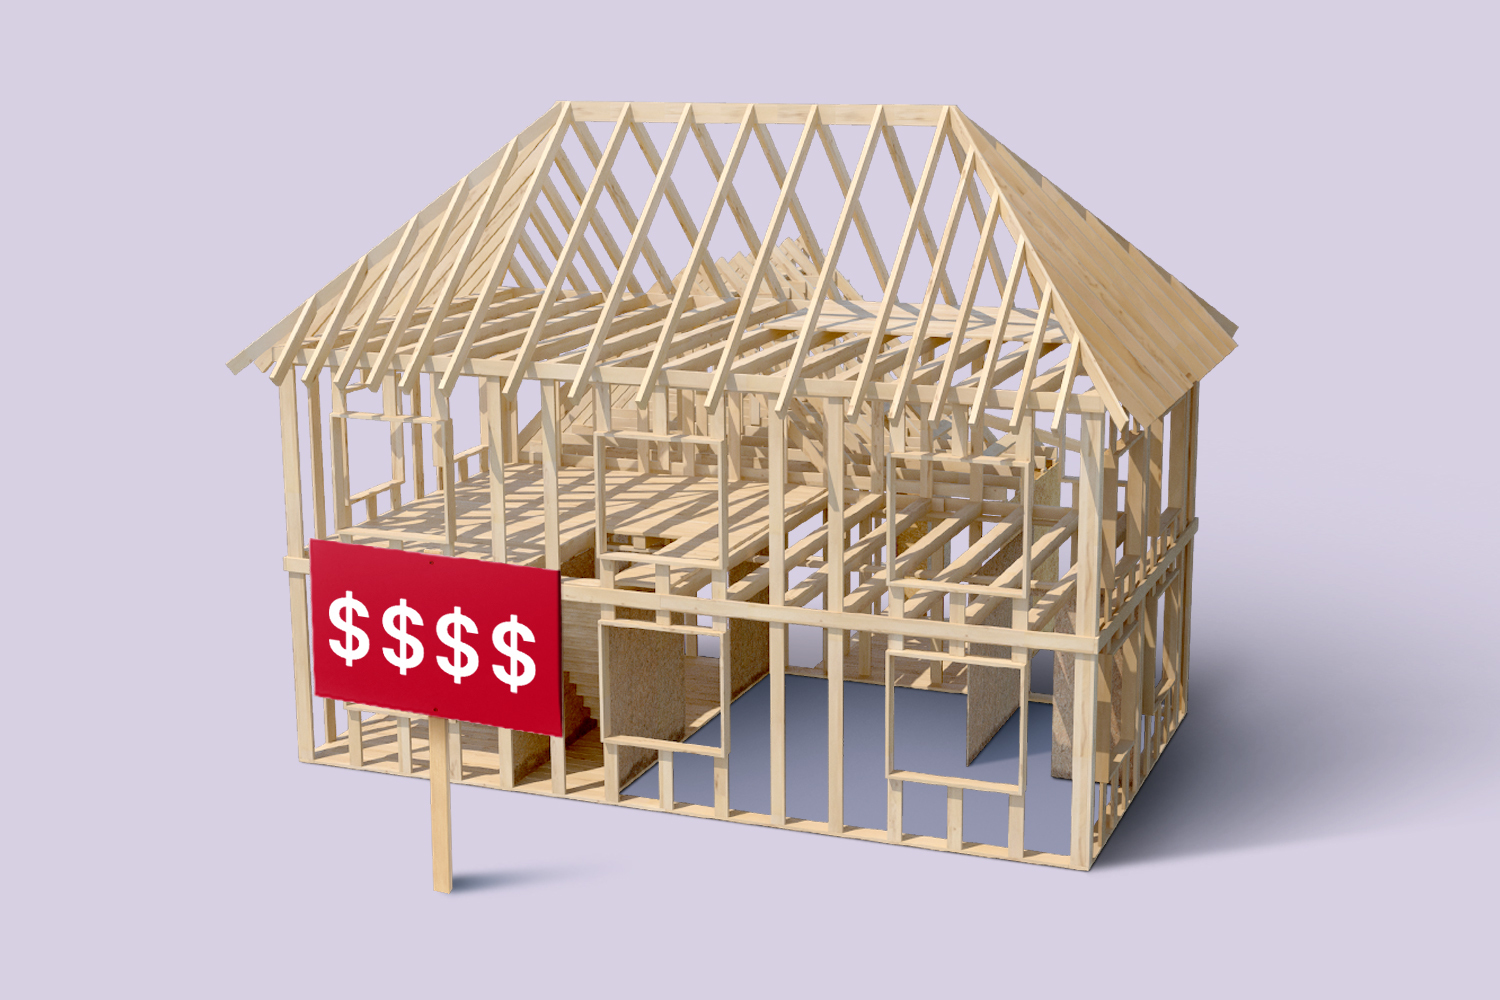 An illustration of the wooden frame of a house in front of a lavender background. In front of the house is a red sign with four $ printed on it.